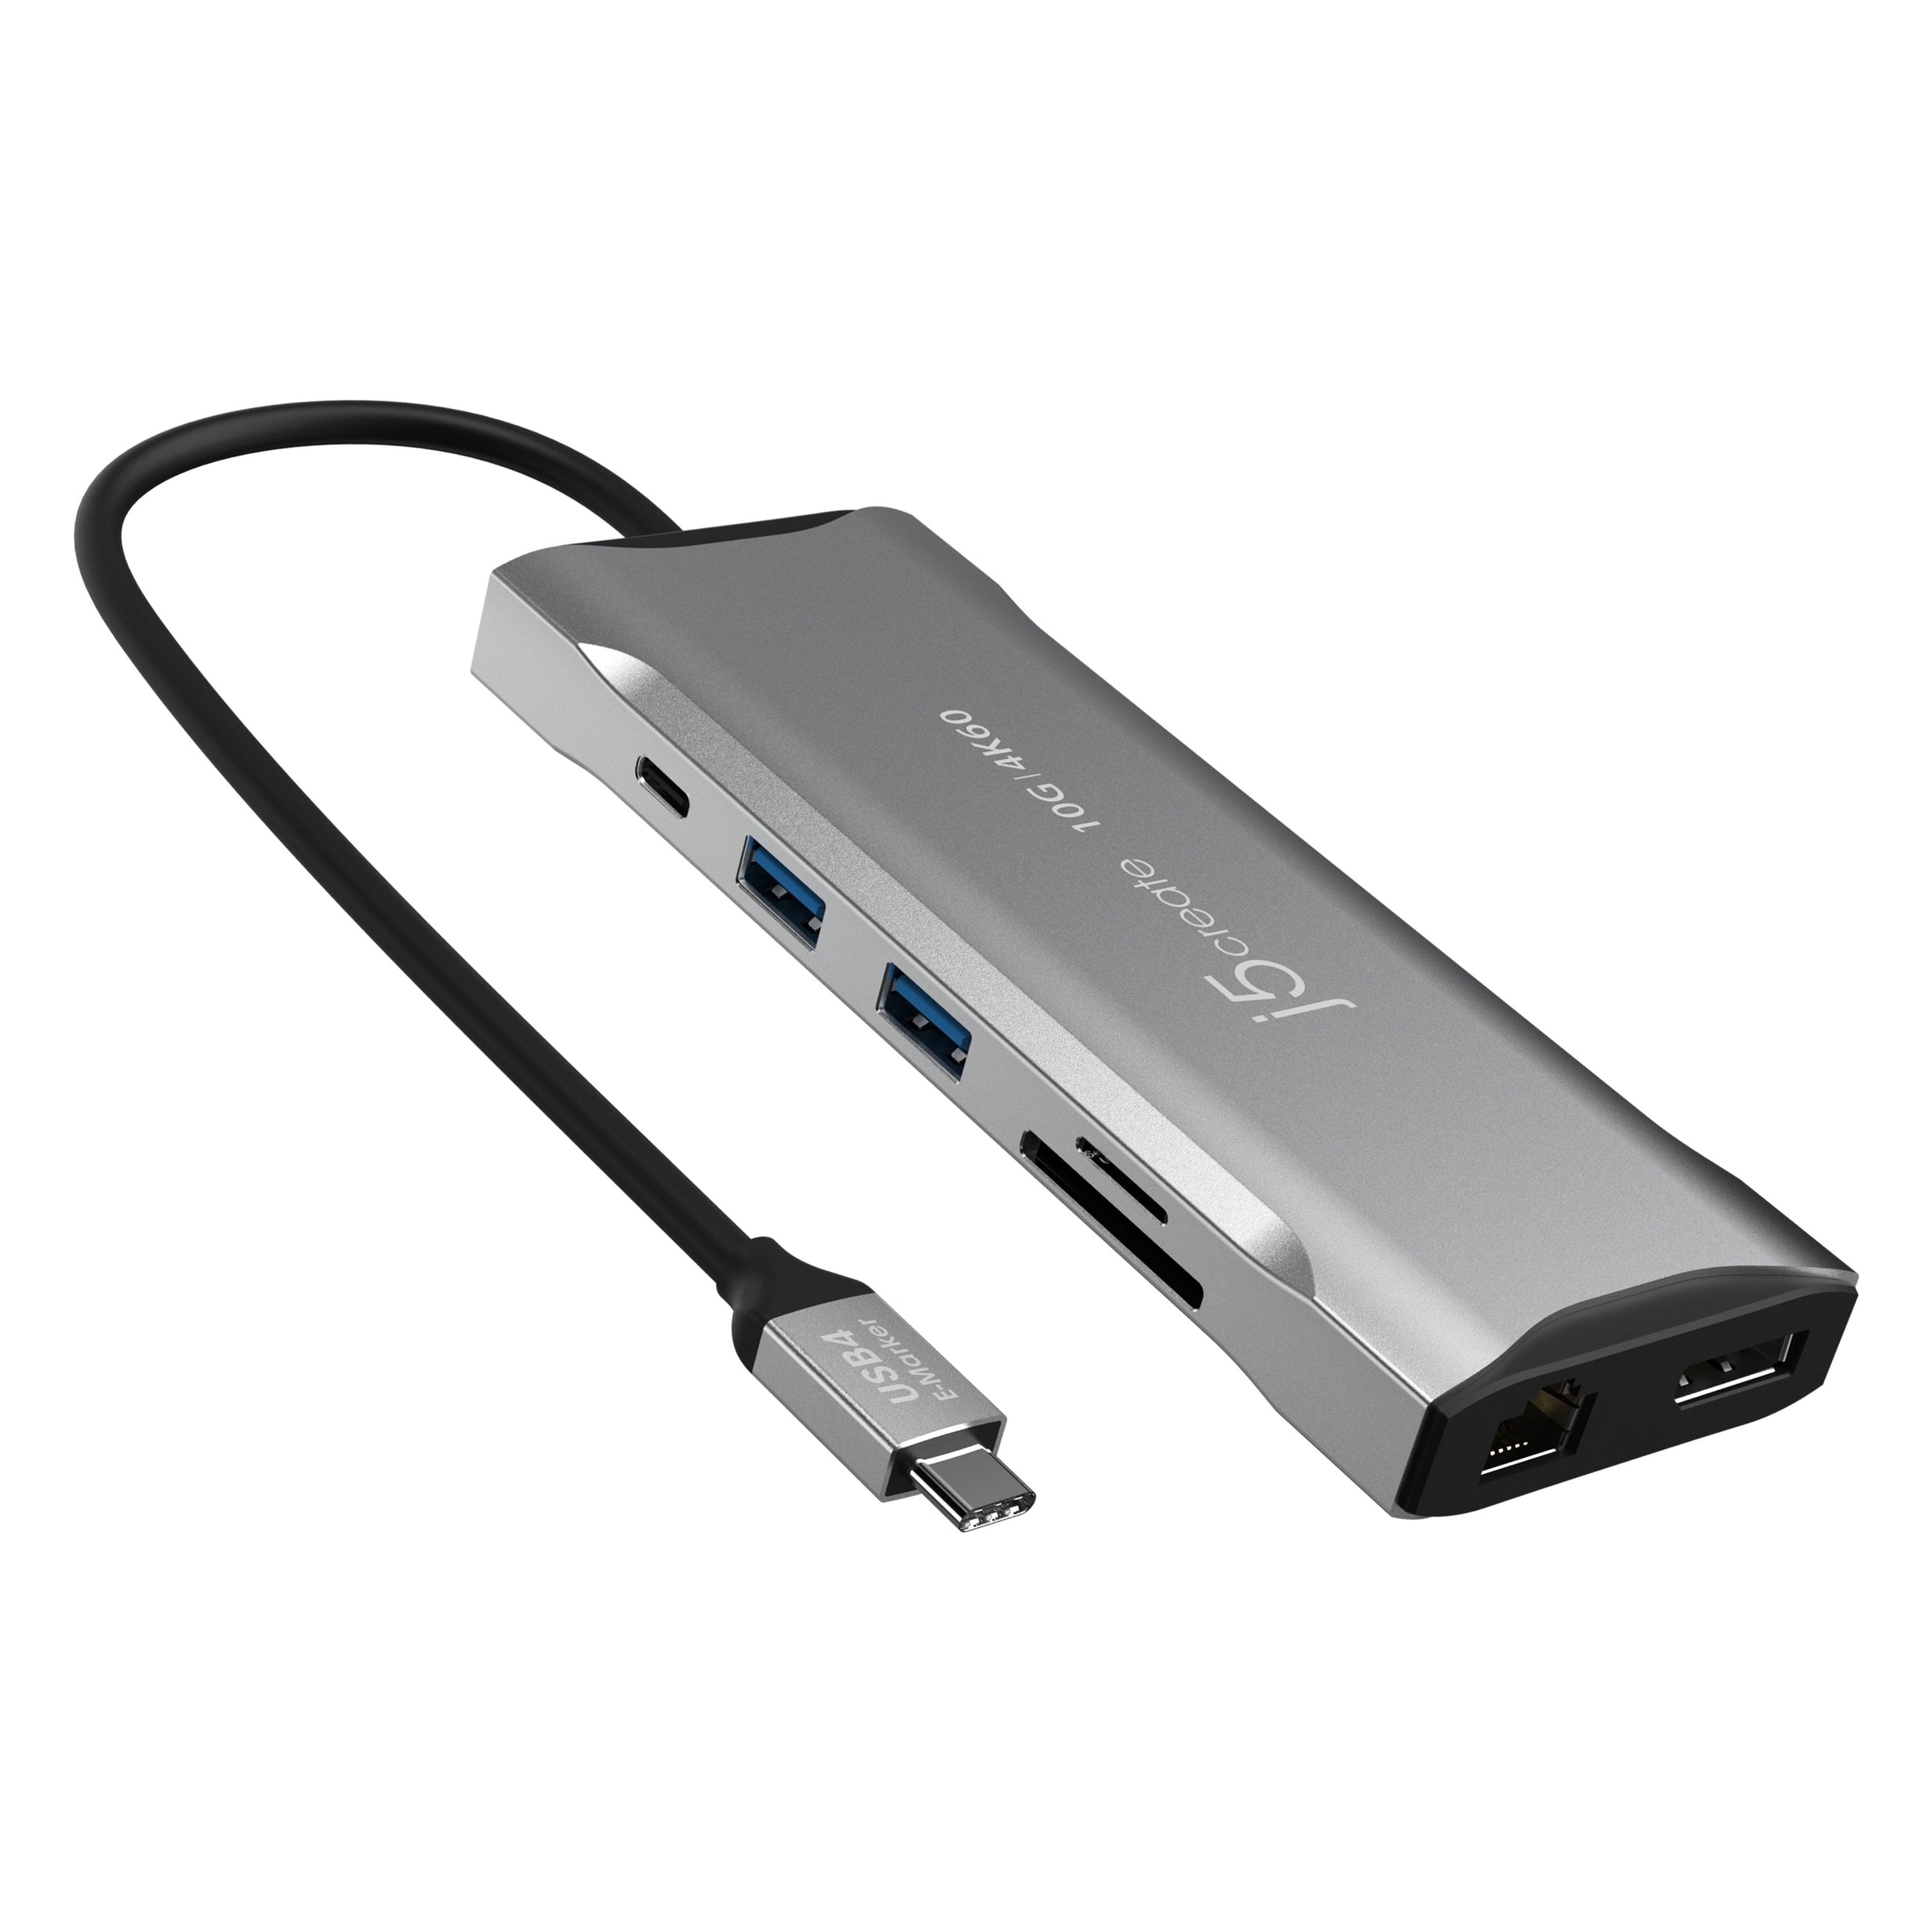 USB C Multiport Adapter - 10Gbps USB Type-C Mini Dock with 4K 30Hz HDMI -  100W Power Delivery Passthrough - 3-Port USB Hub, GbE - USB 3.1/3.2 Gen 2